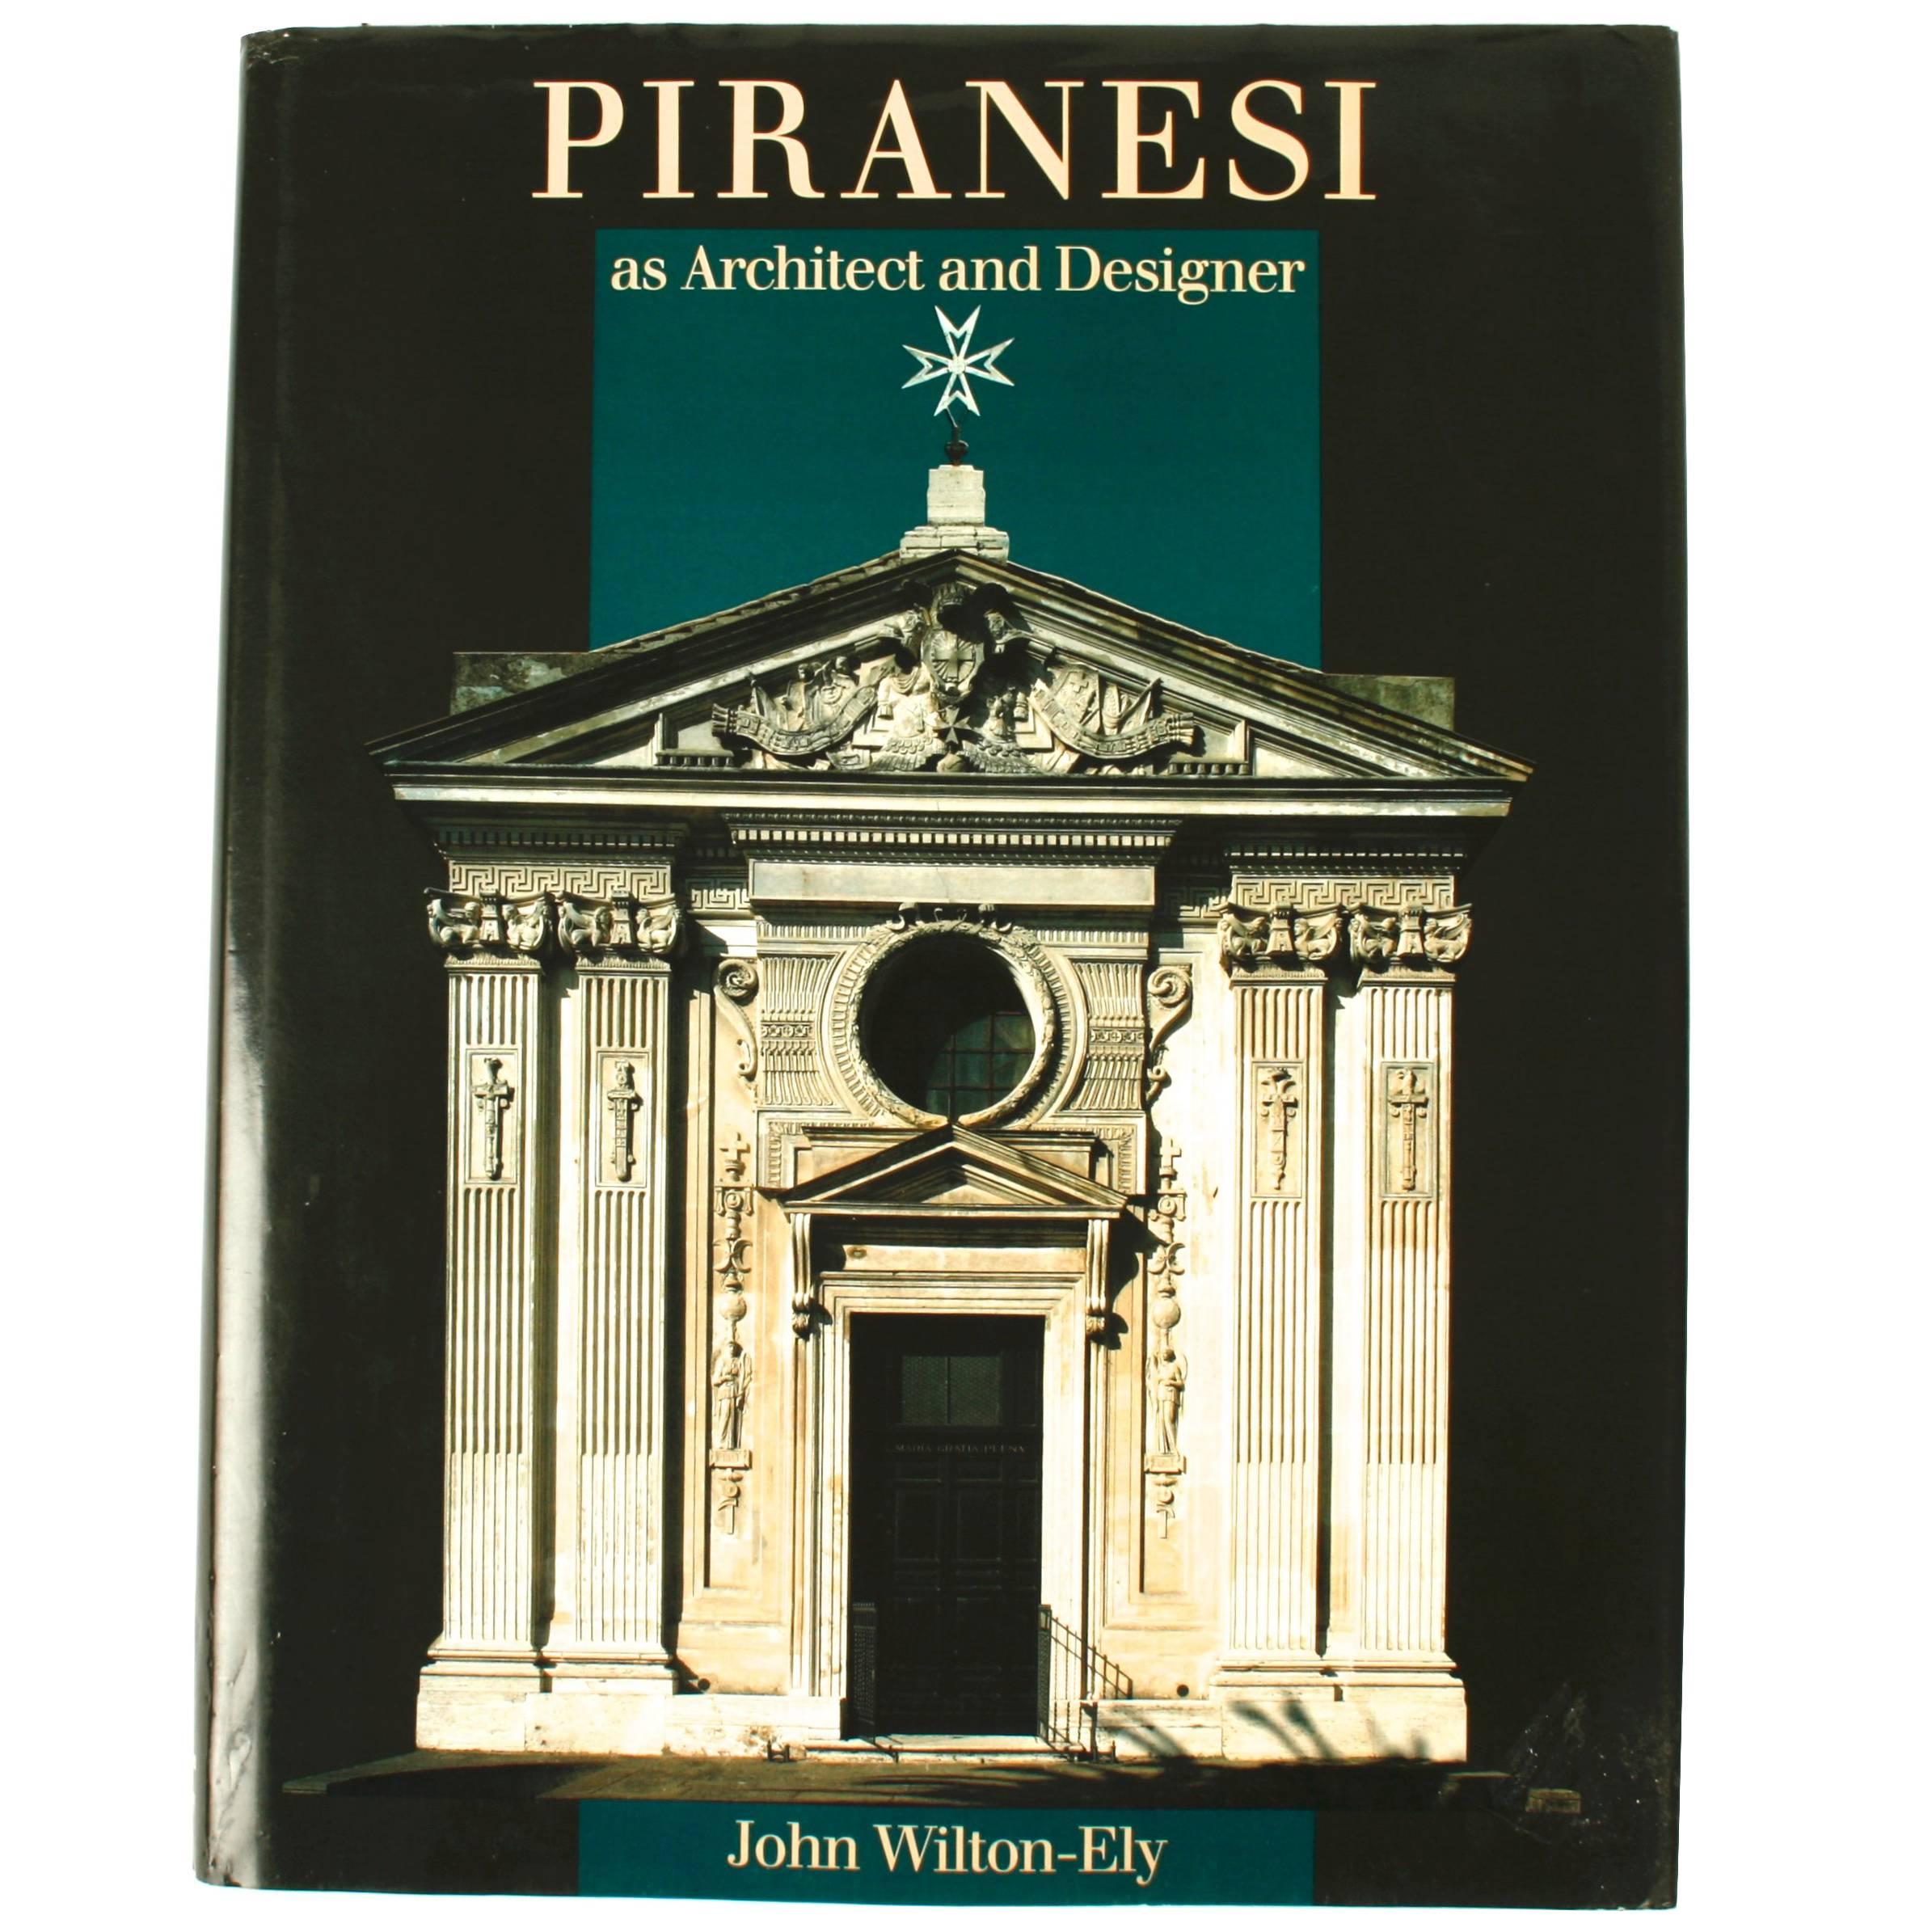 Piranesi as Architect and Designer by John Wilton-Ely, First Edition